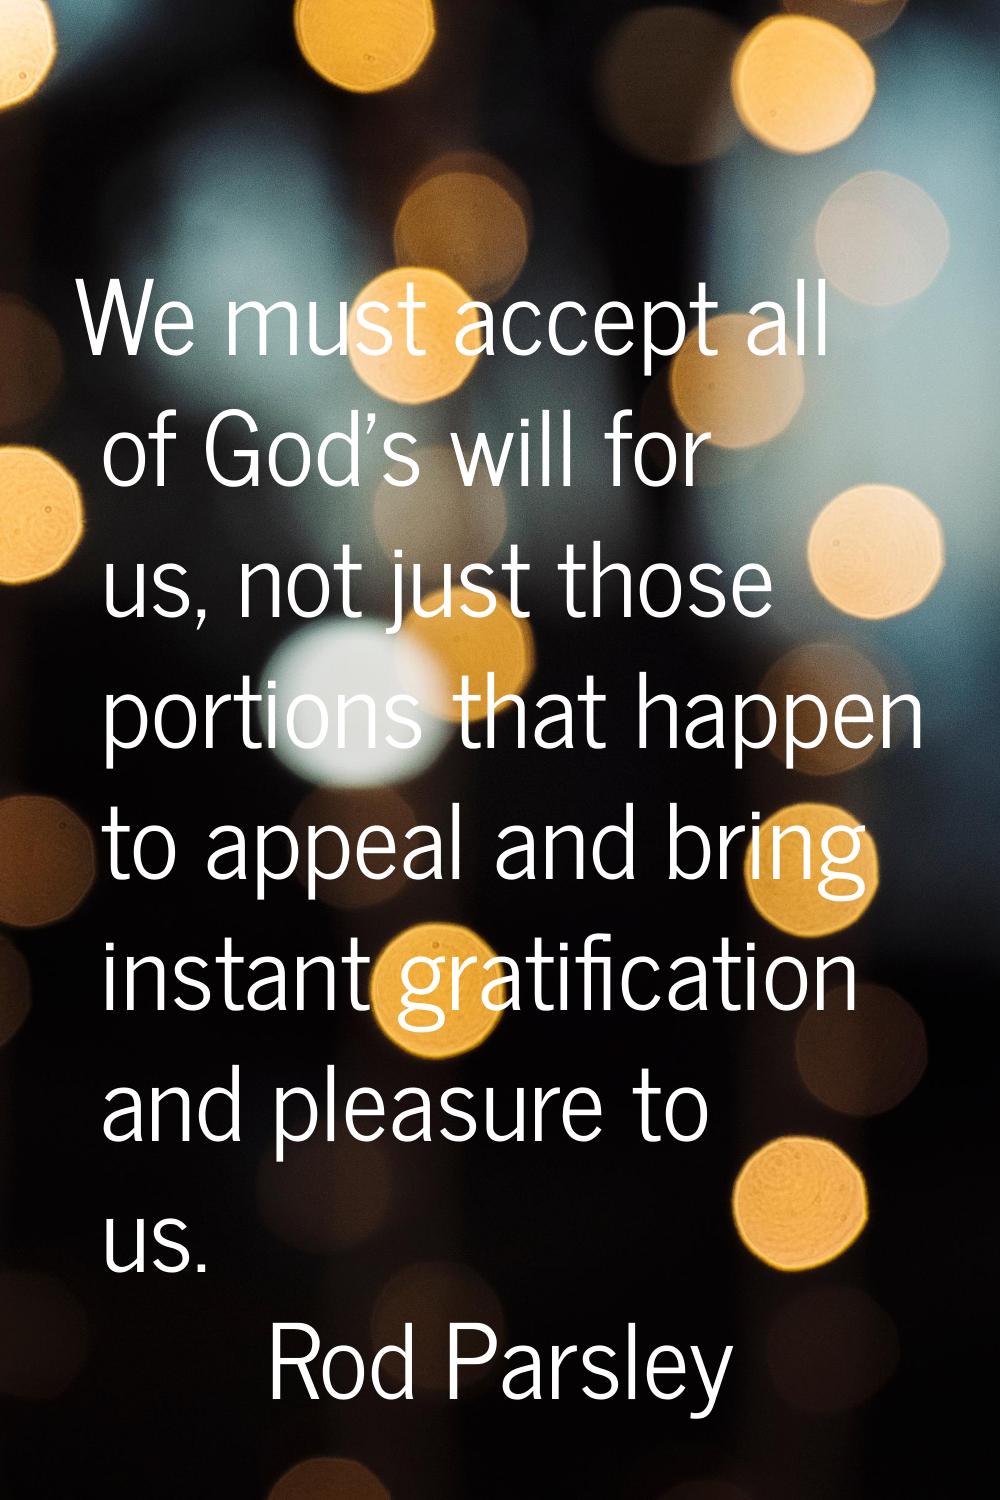 We must accept all of God's will for us, not just those portions that happen to appeal and bring in